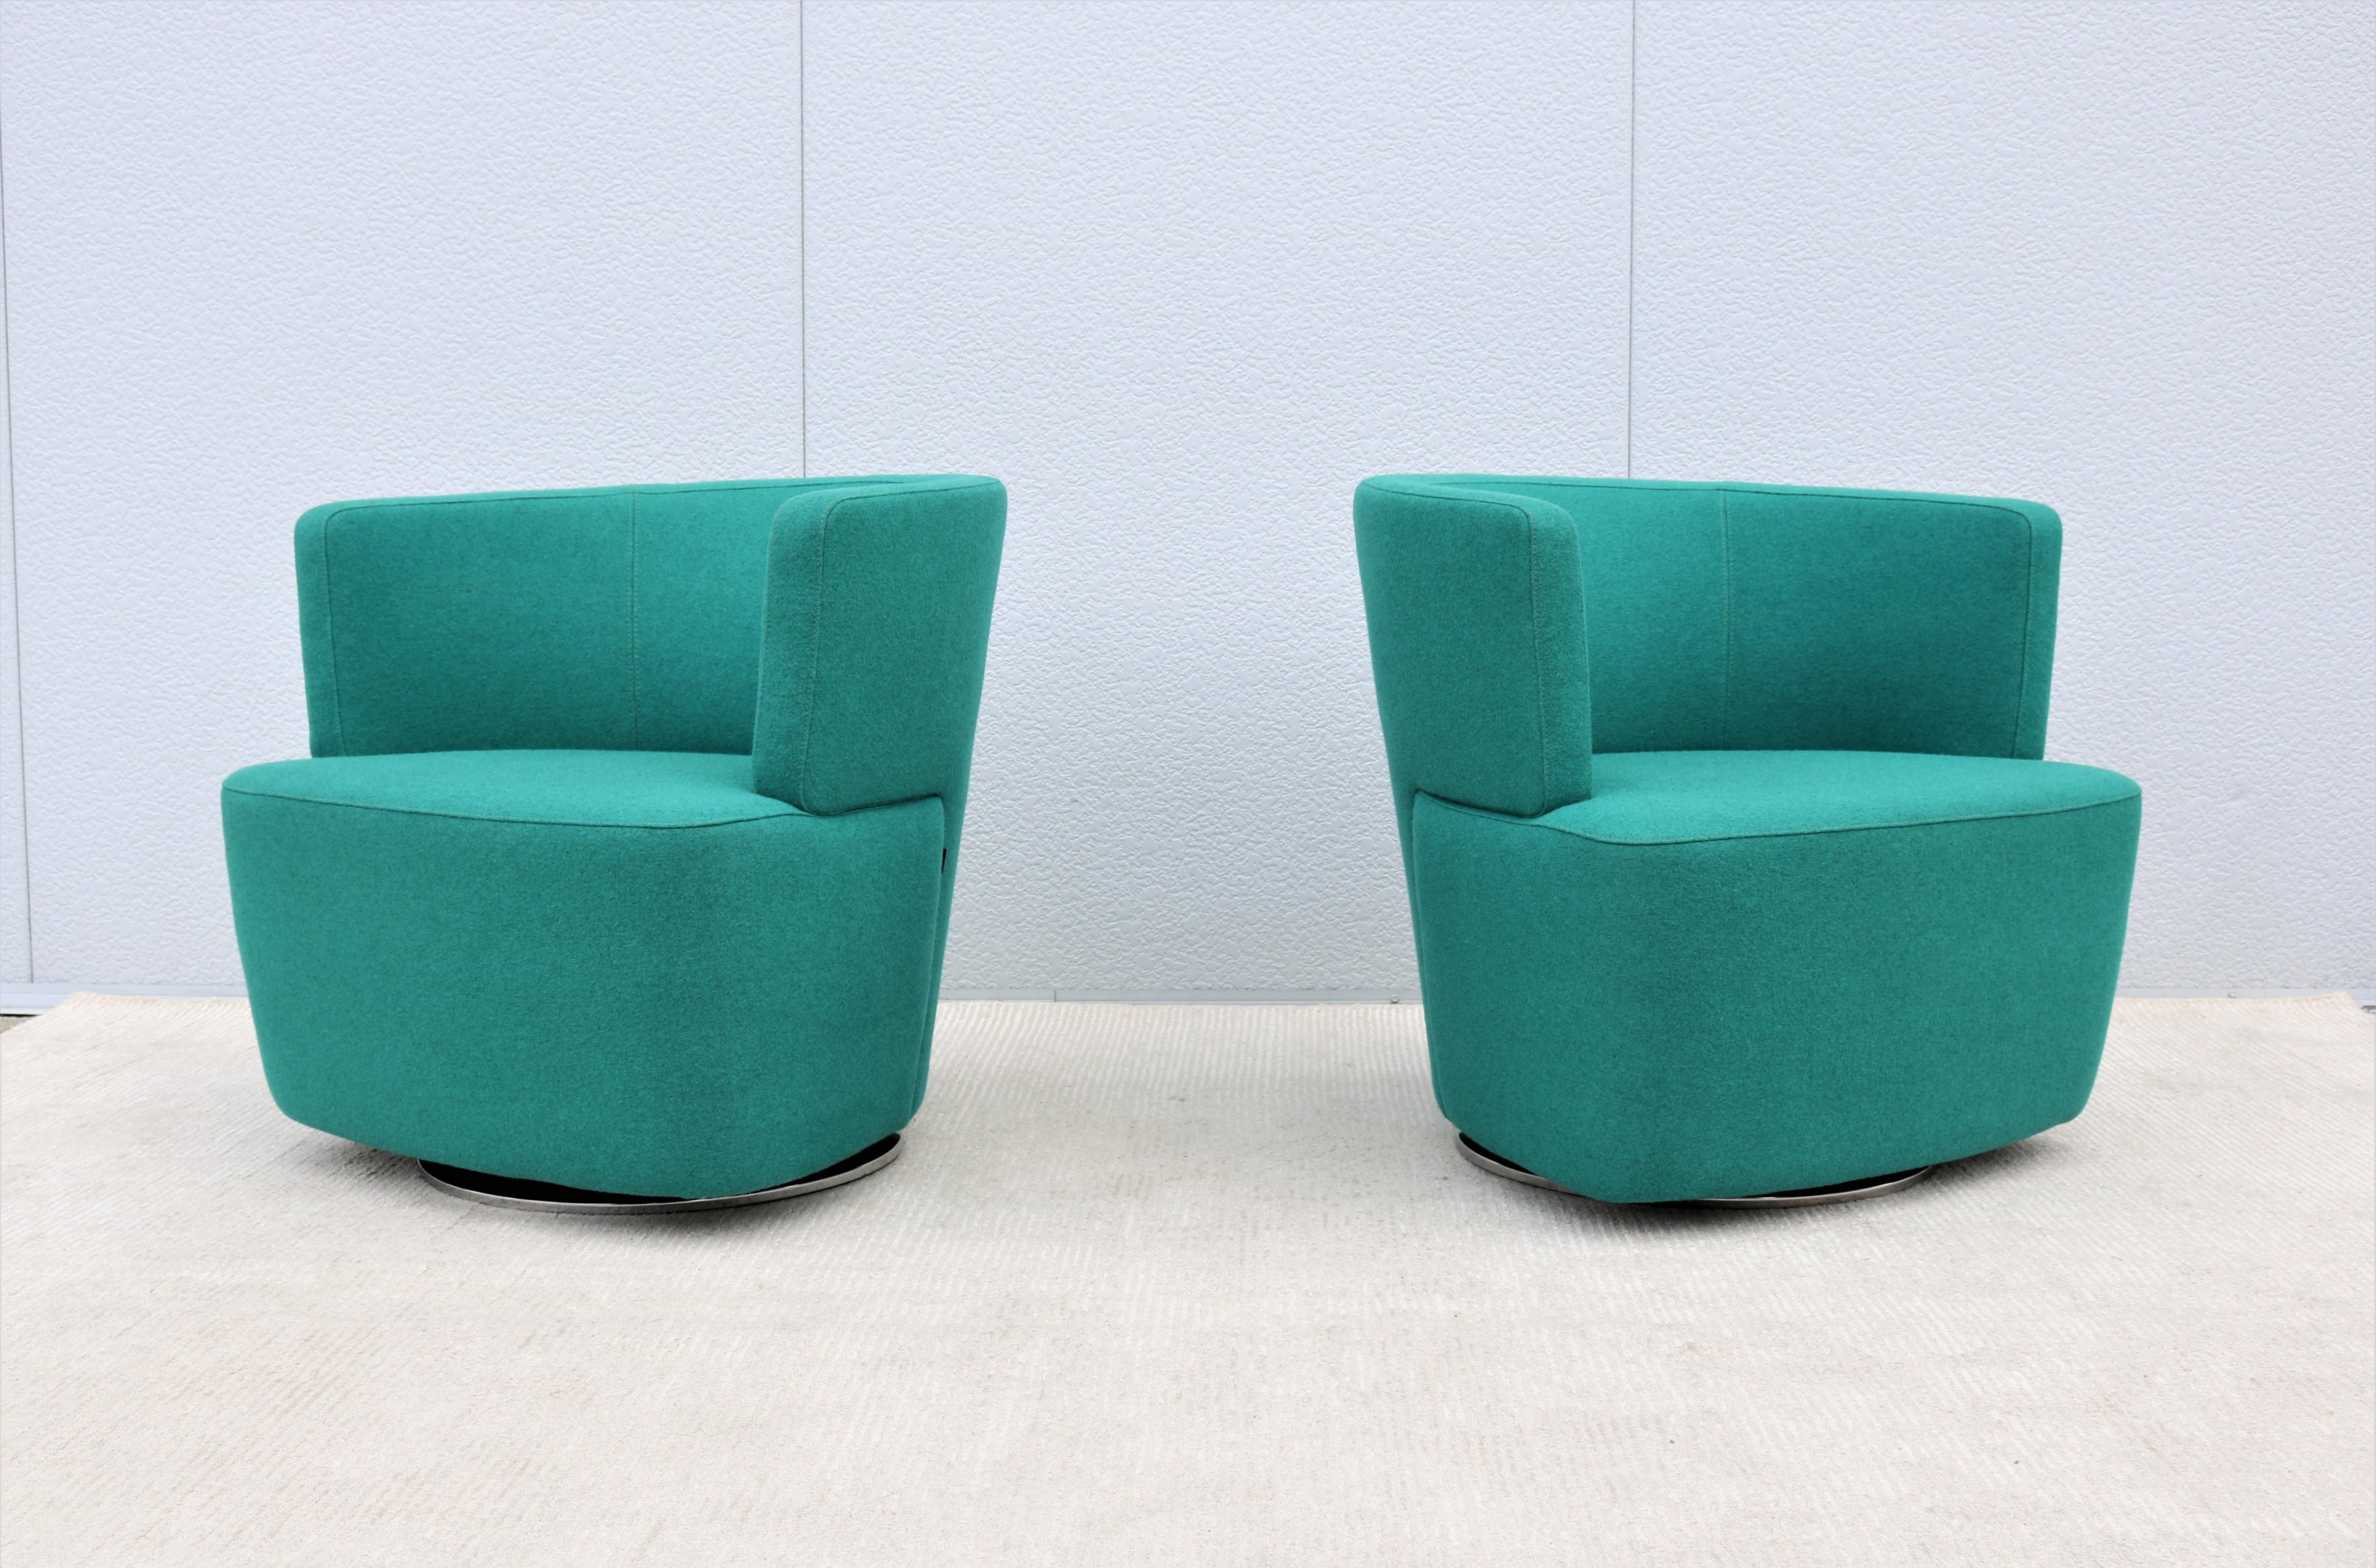 Contemporary Modern EOOS for Coalesse Joel Blue Swivel Lounge Chairs by Walter Knoll, a Pair For Sale